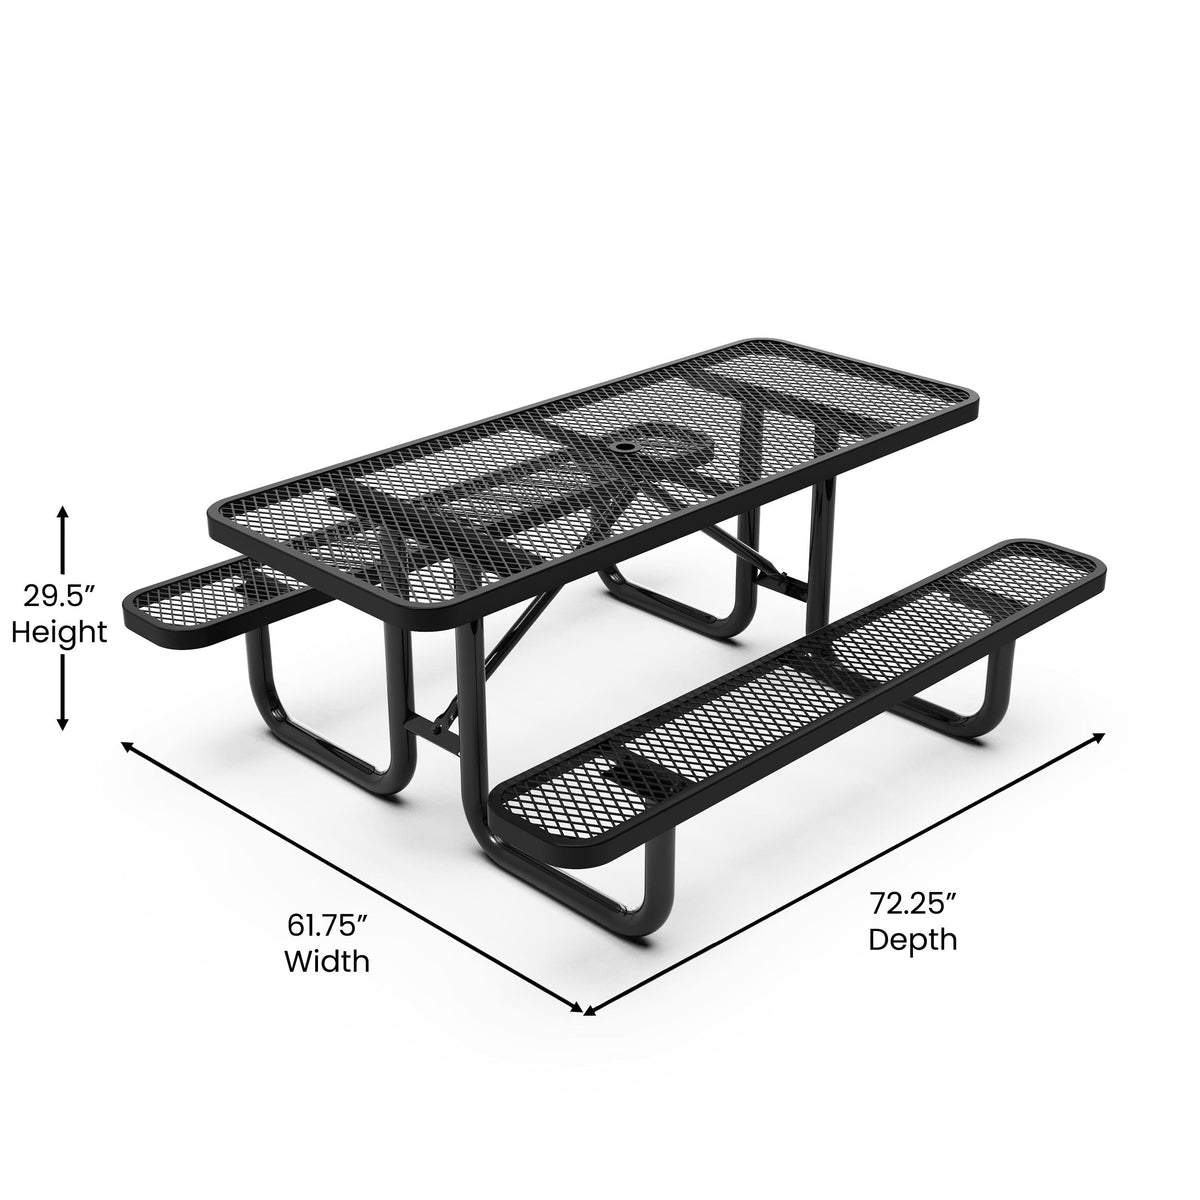 Black,6' |#| Commercial Grade 6' Rectangular Expanded Mesh Metal Outdoor Picnic Table - Black